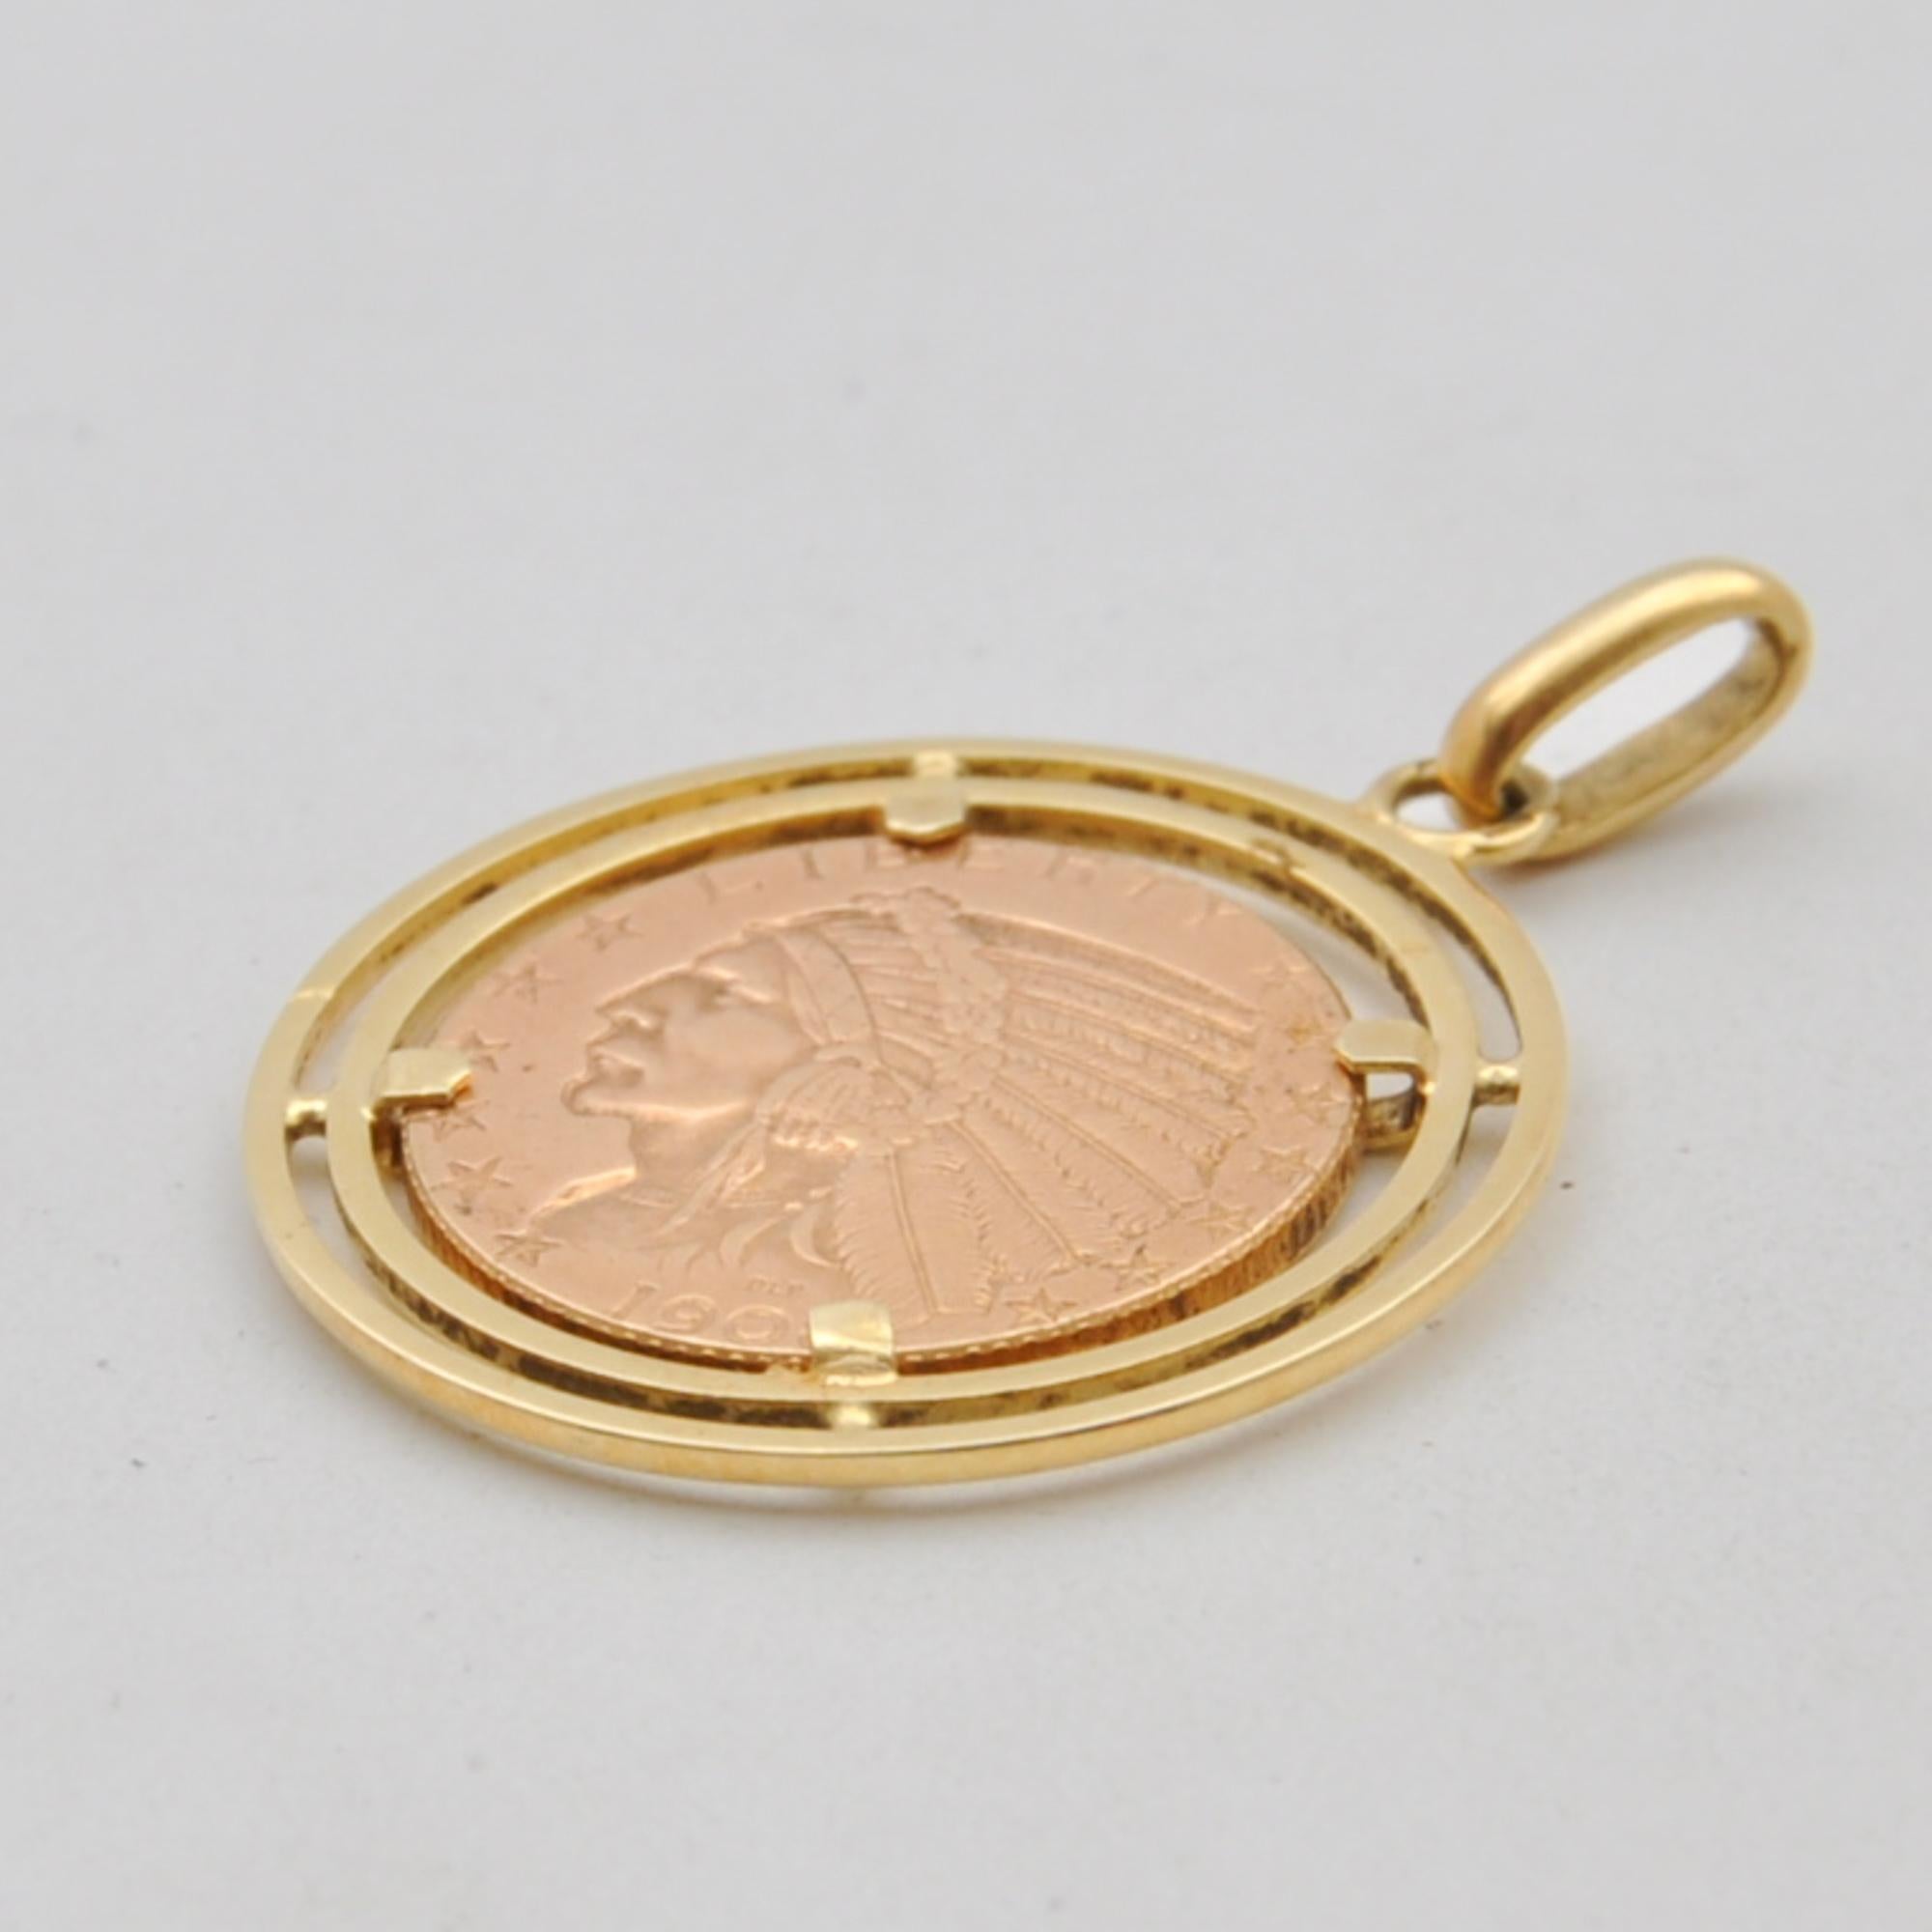 1908 American Eagle Five Dollar 21.6K Gold Coin Pendant For Sale 1